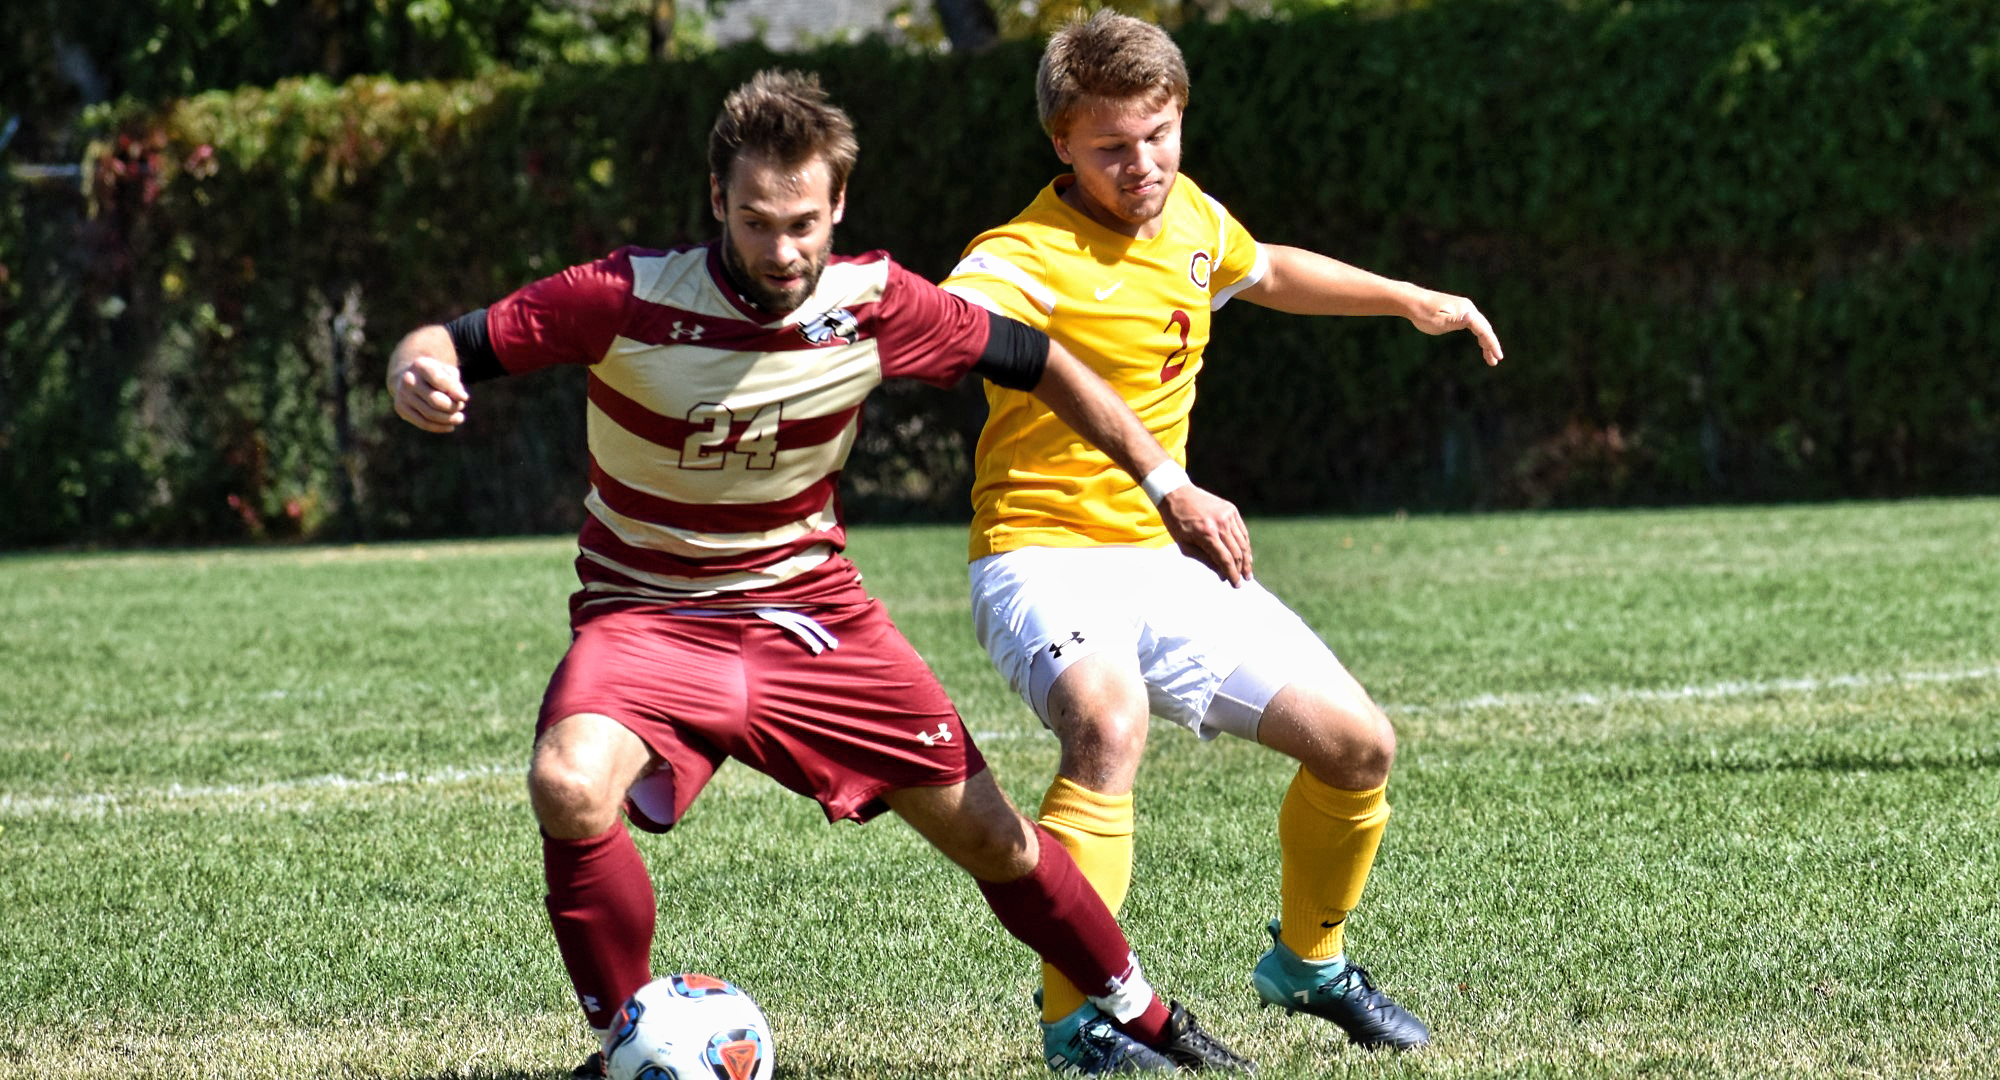 Junior Spencer Lancaster had the lone goal in the Cobbers 3-1 loss to No.21-ranked Macalester.